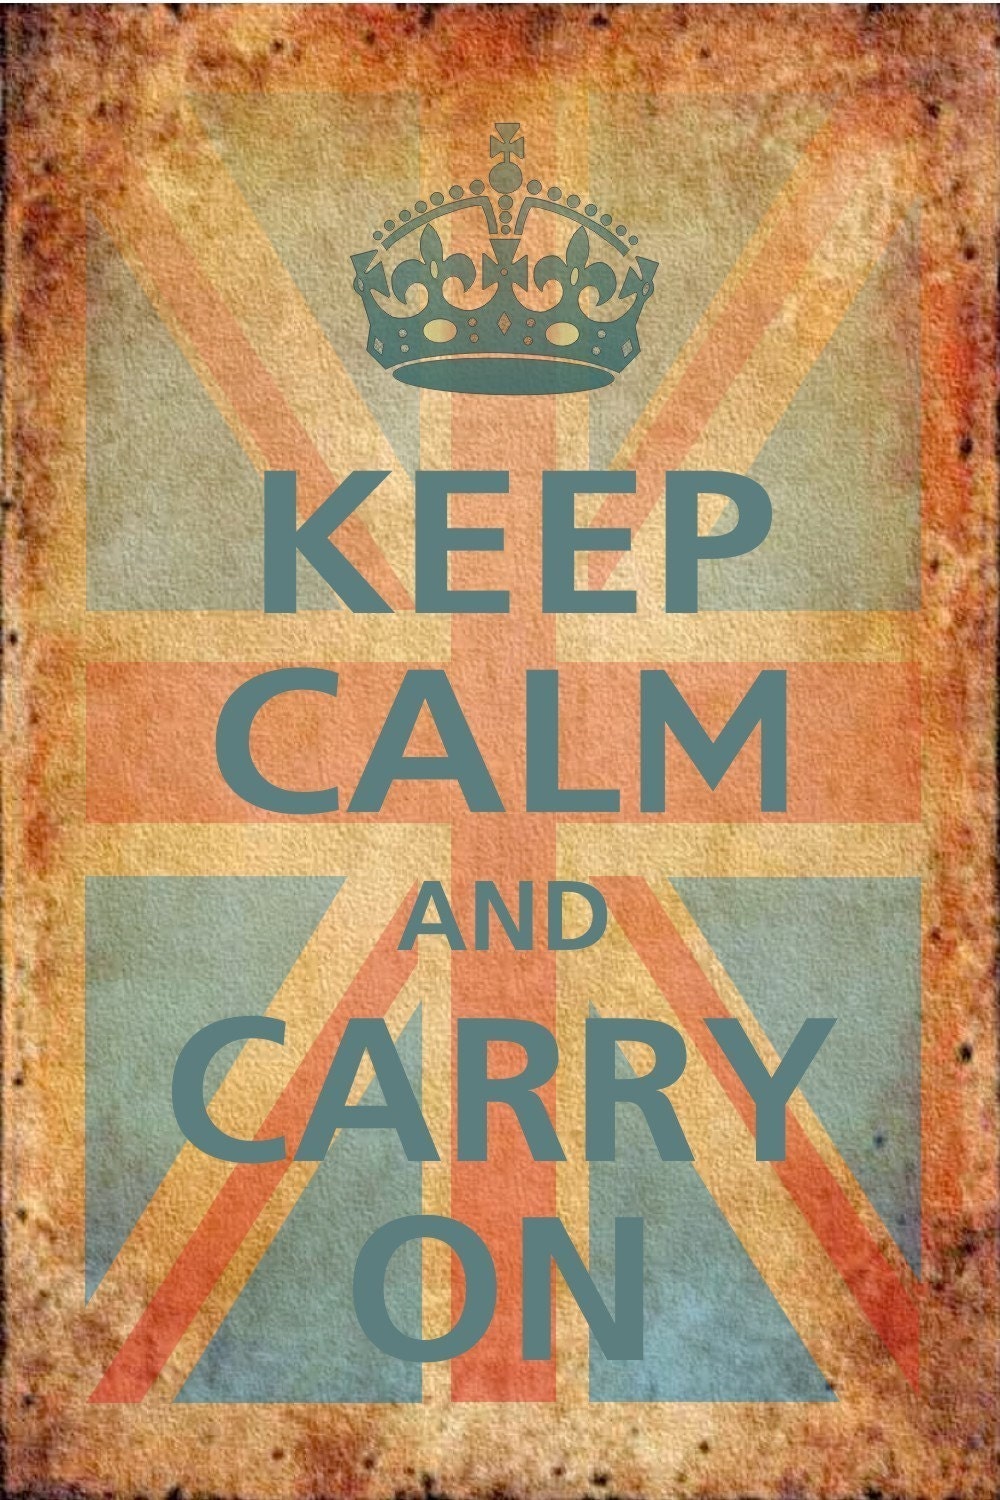 KEEP CALM AND CARRY ON 13x19 Poster (BRITISH FLAG) with FREE 11x14